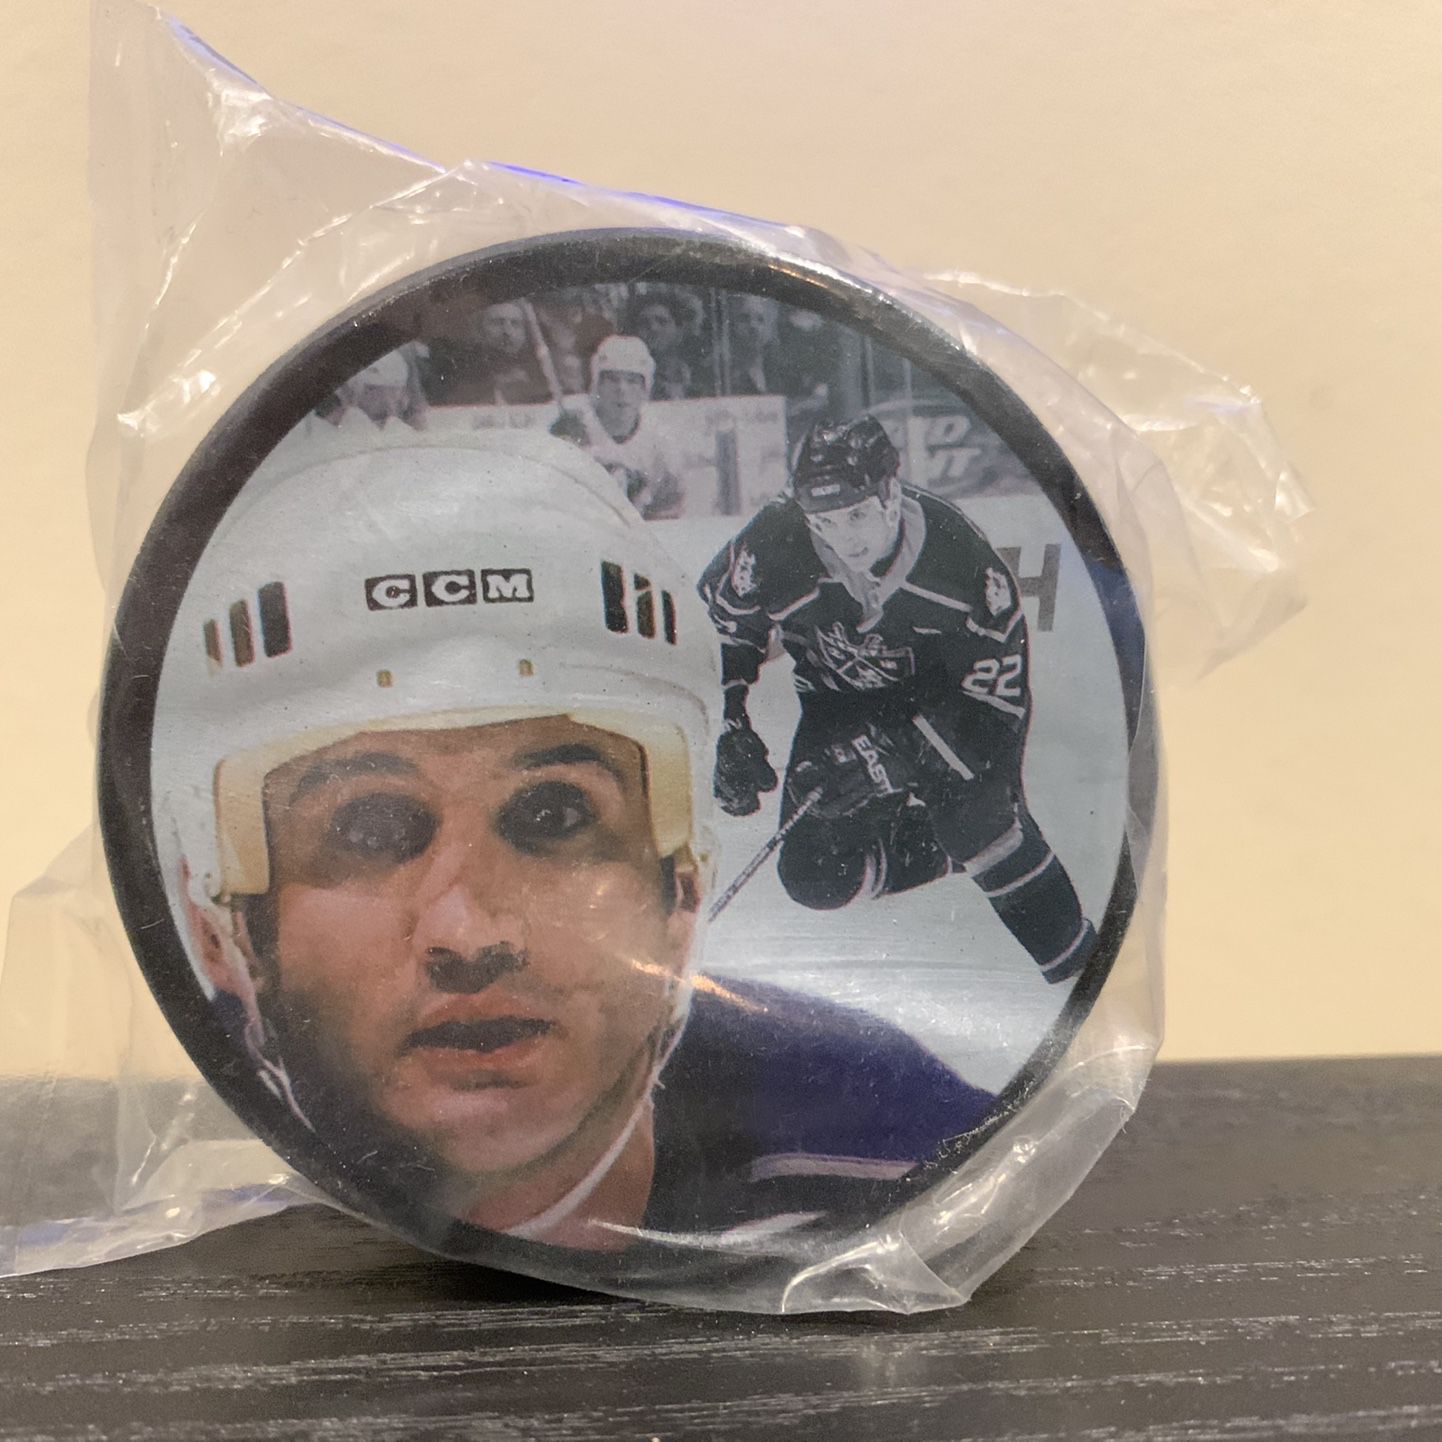 LOS ANGELES KINGS IAN LAPERRIERE #22 NHL LEGENDS NIGHT PUCK for Sale in  Irvine, CA - OfferUp